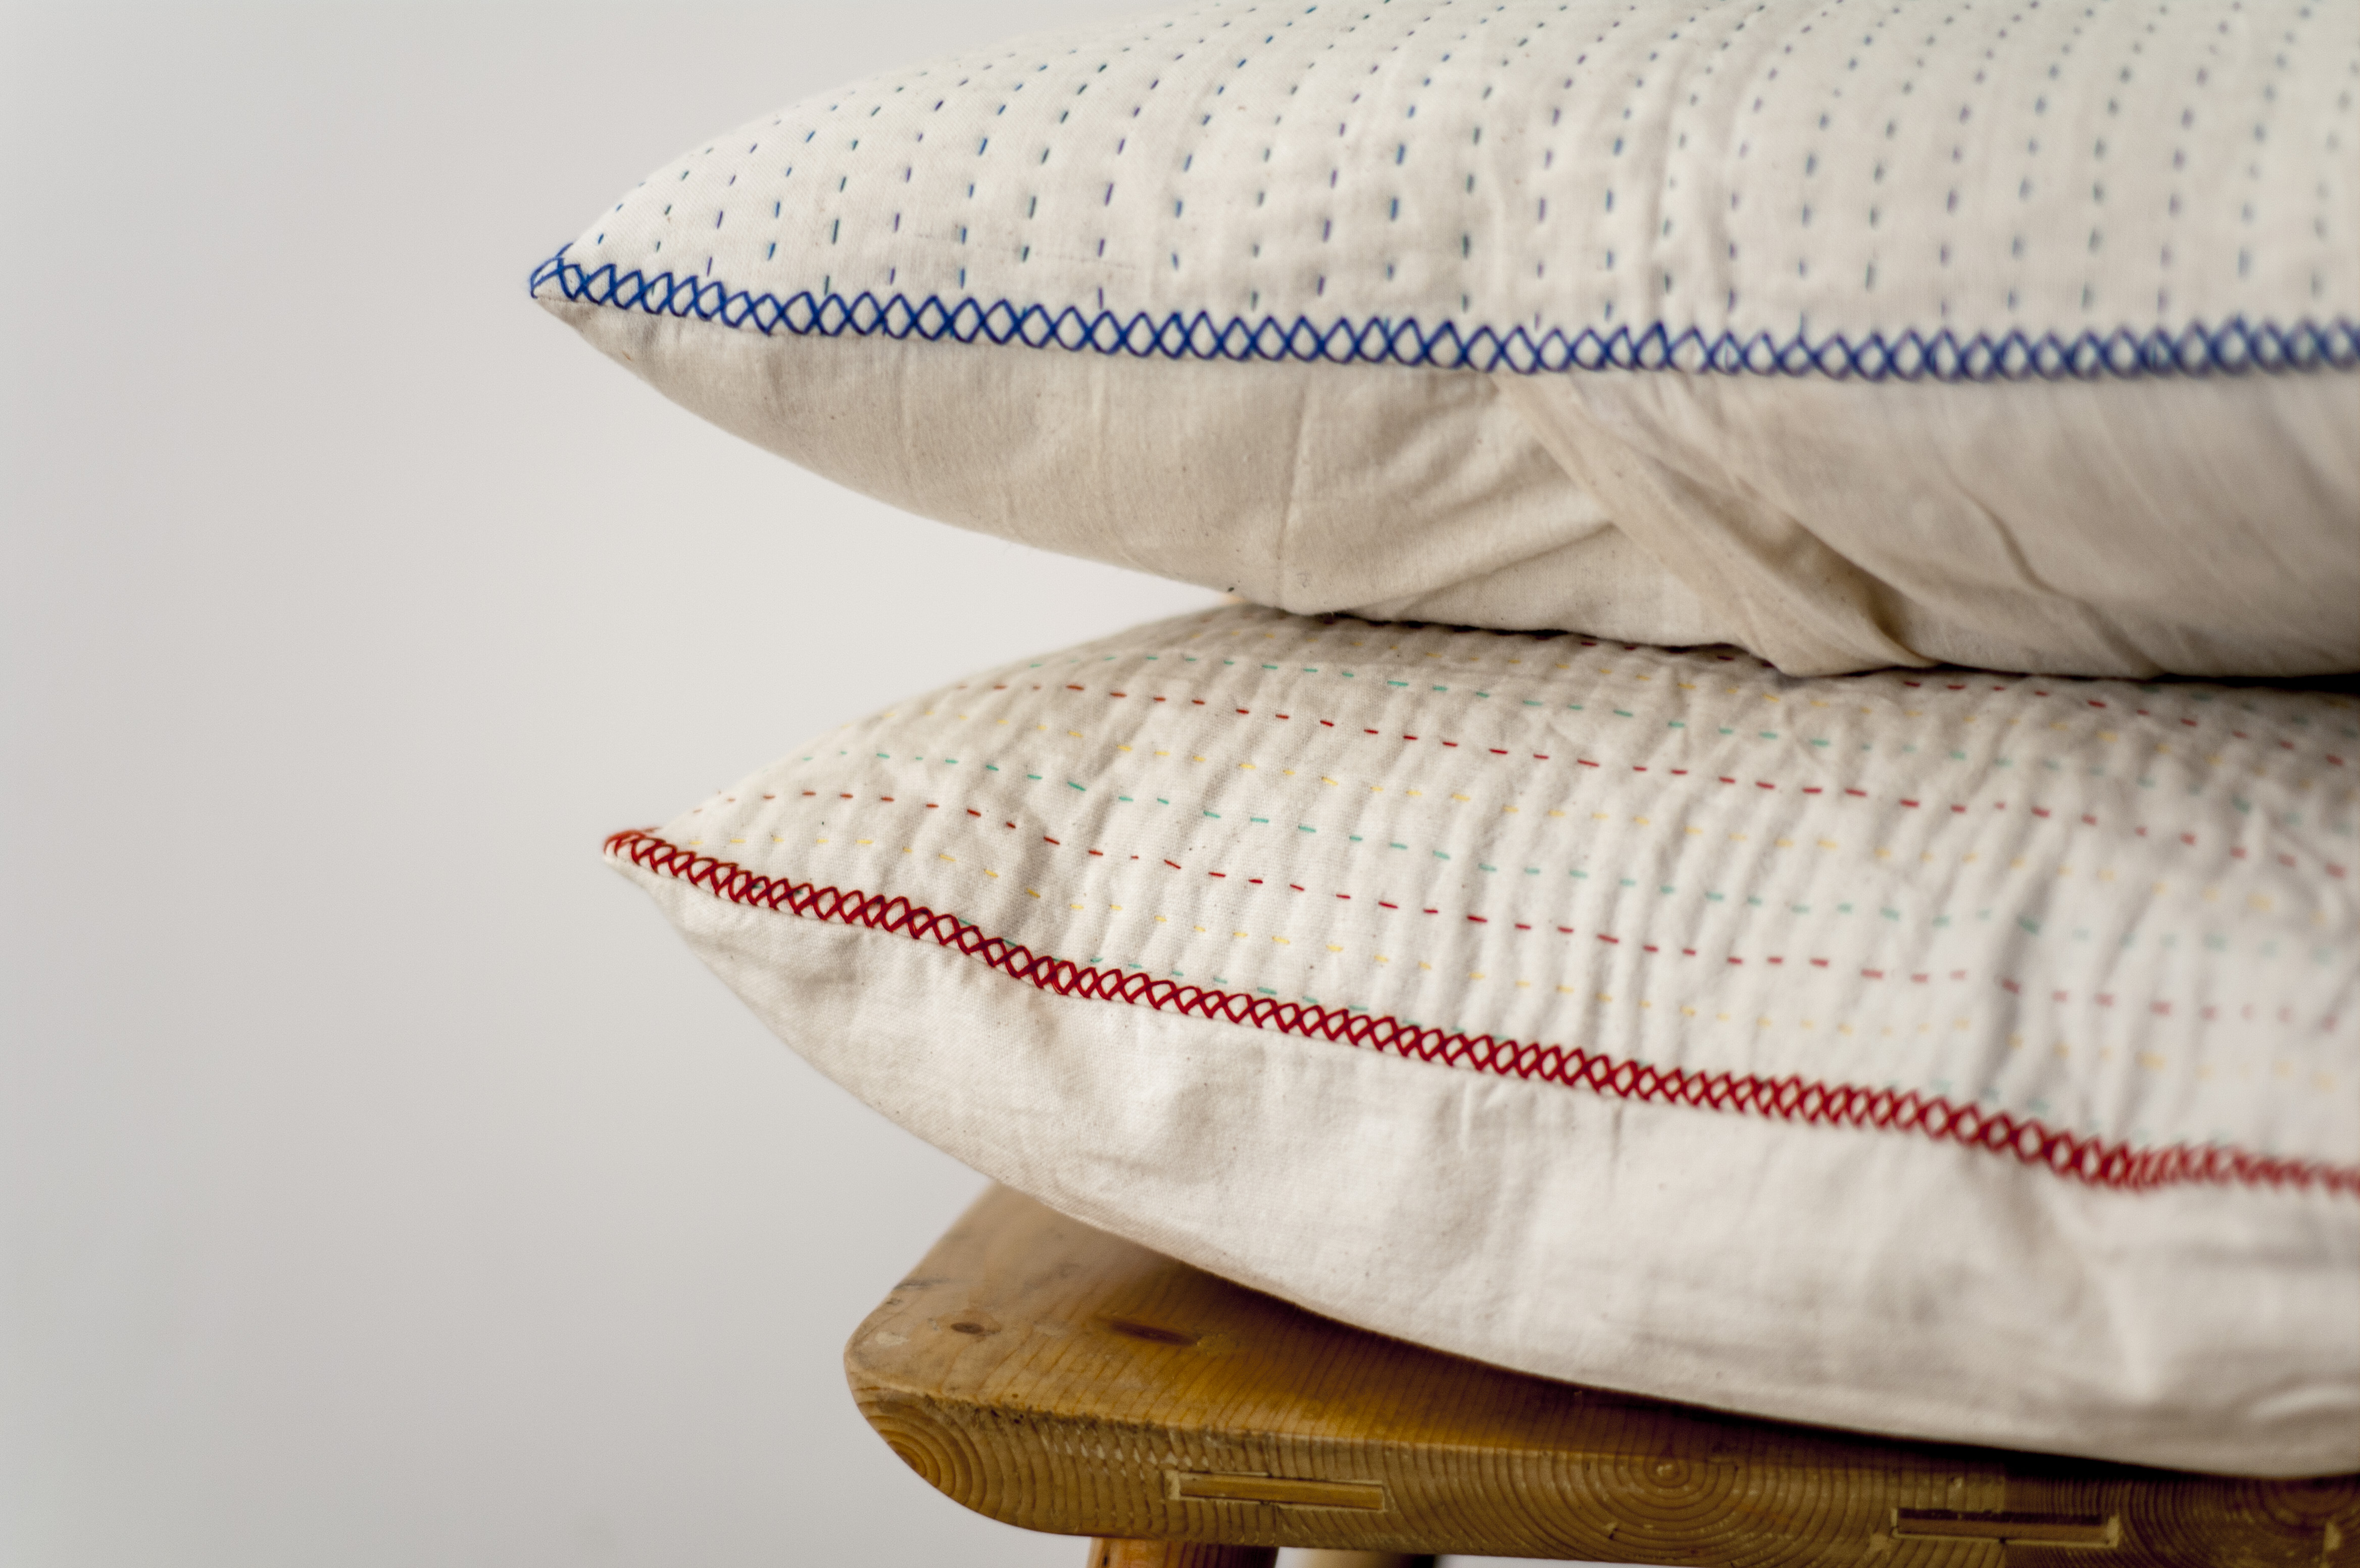 Your choice of red or blue kantha stitching on these natural cotton fabric cushions